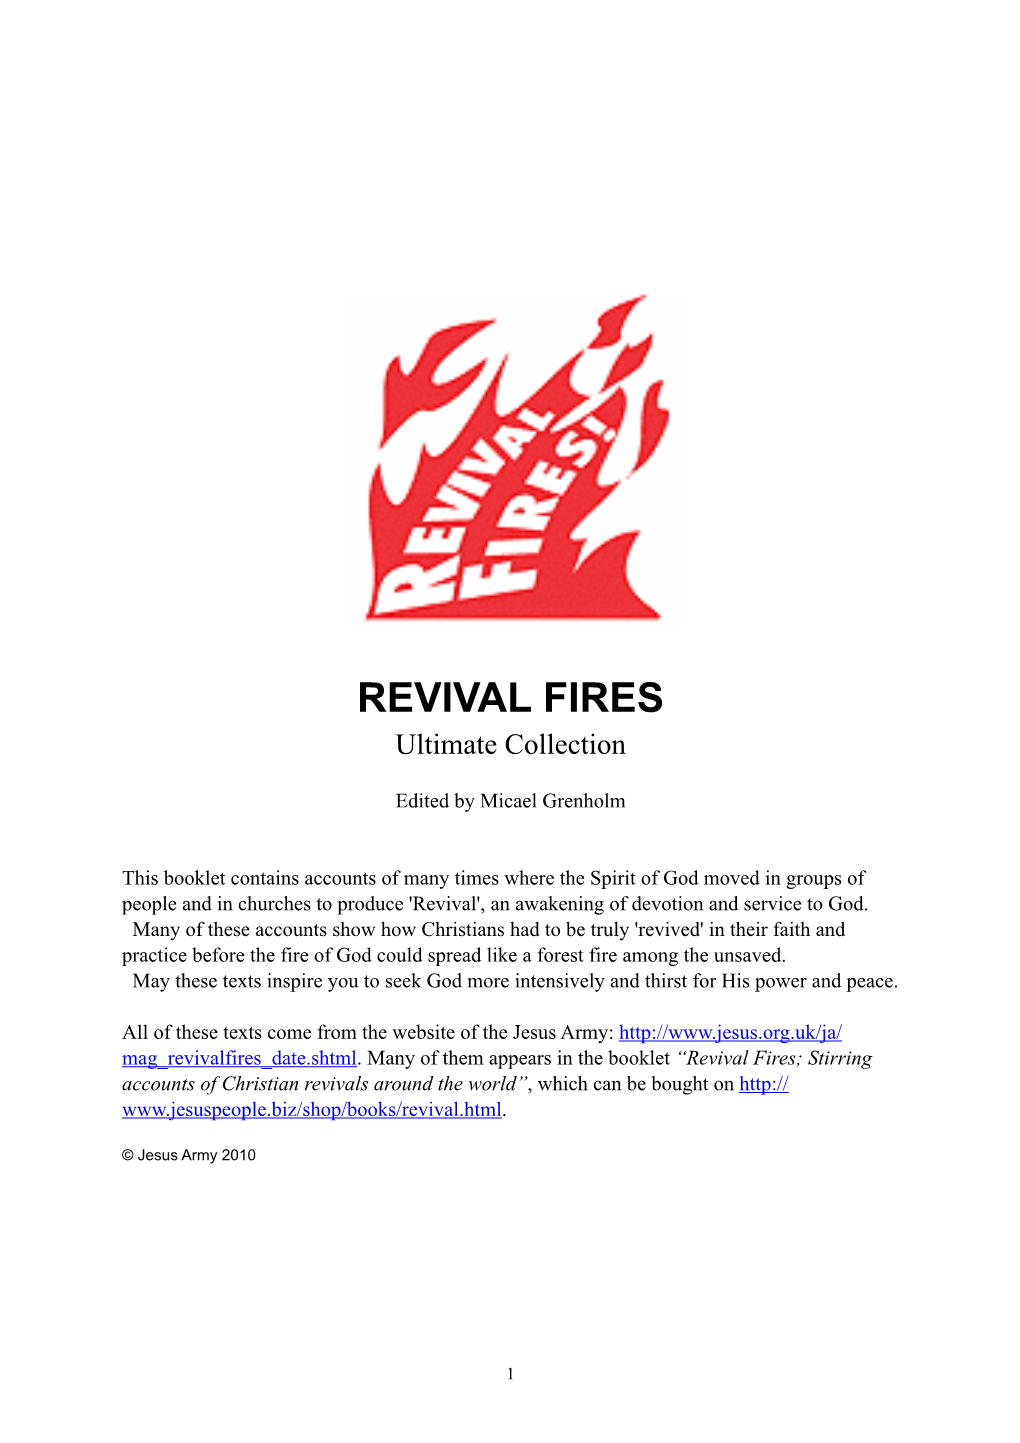 REVIVAL FIRES Ultimate Collection